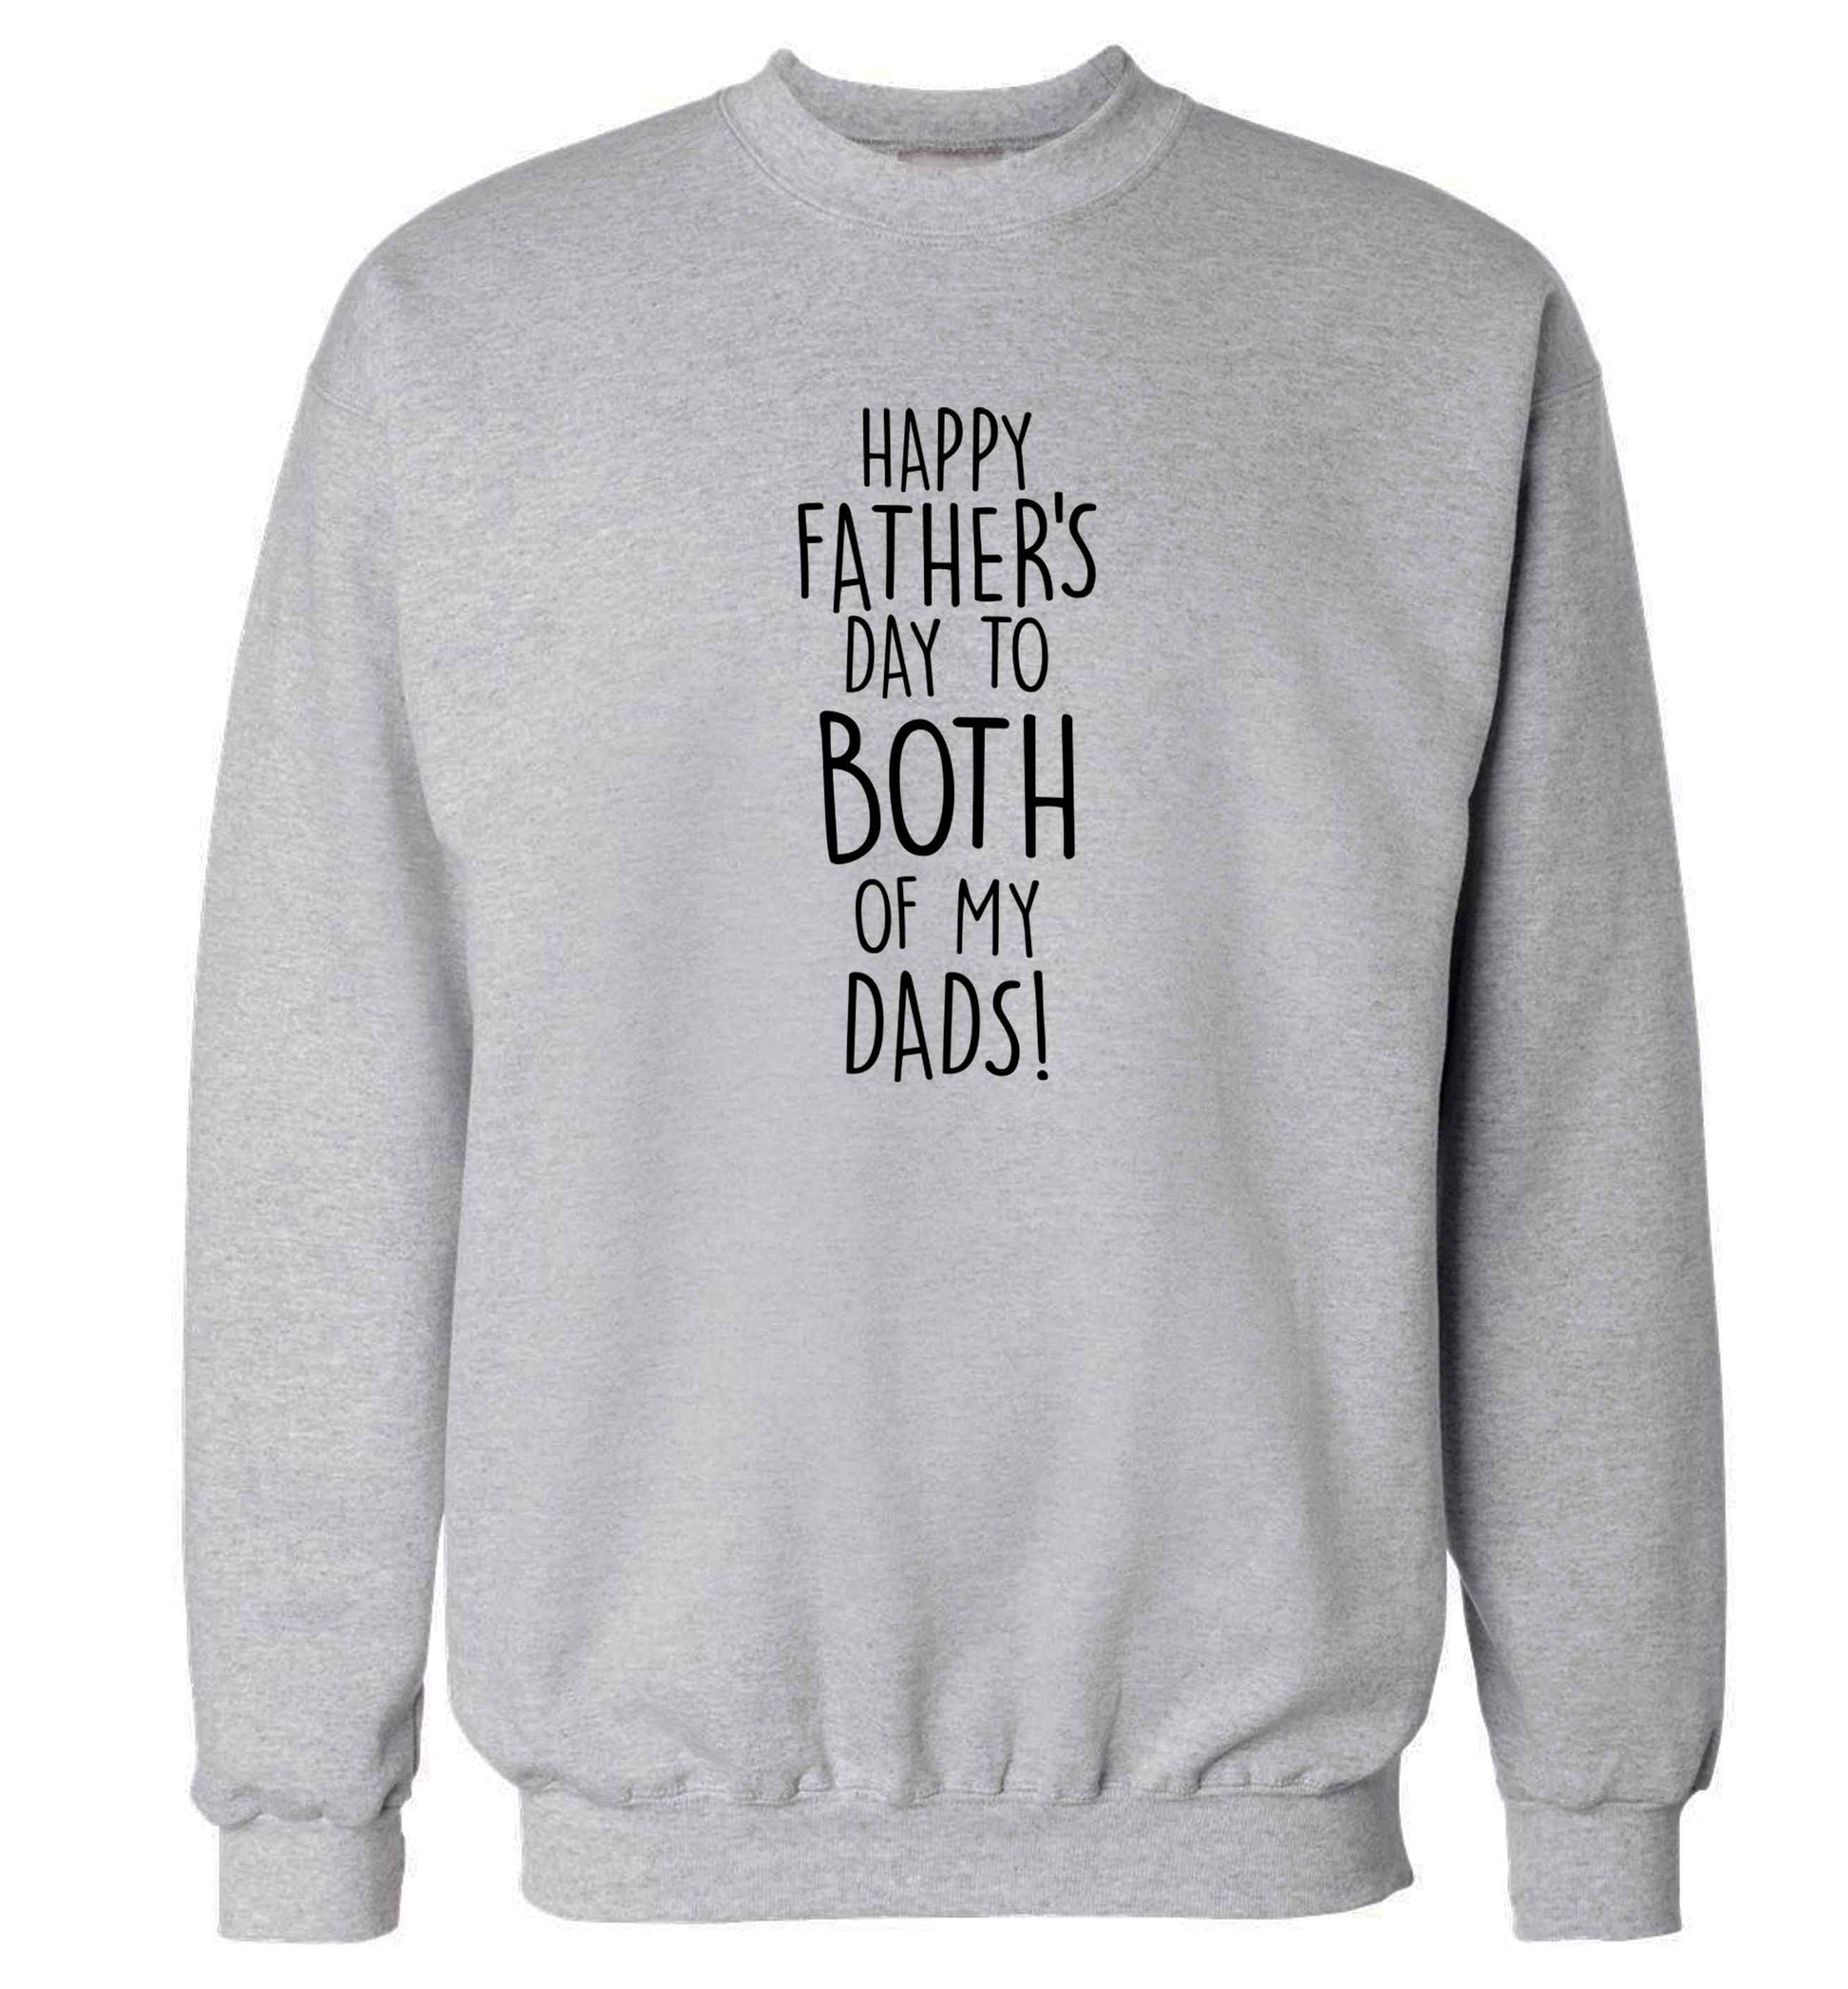 Happy Father's day to both of my dads adult's unisex grey sweater 2XL